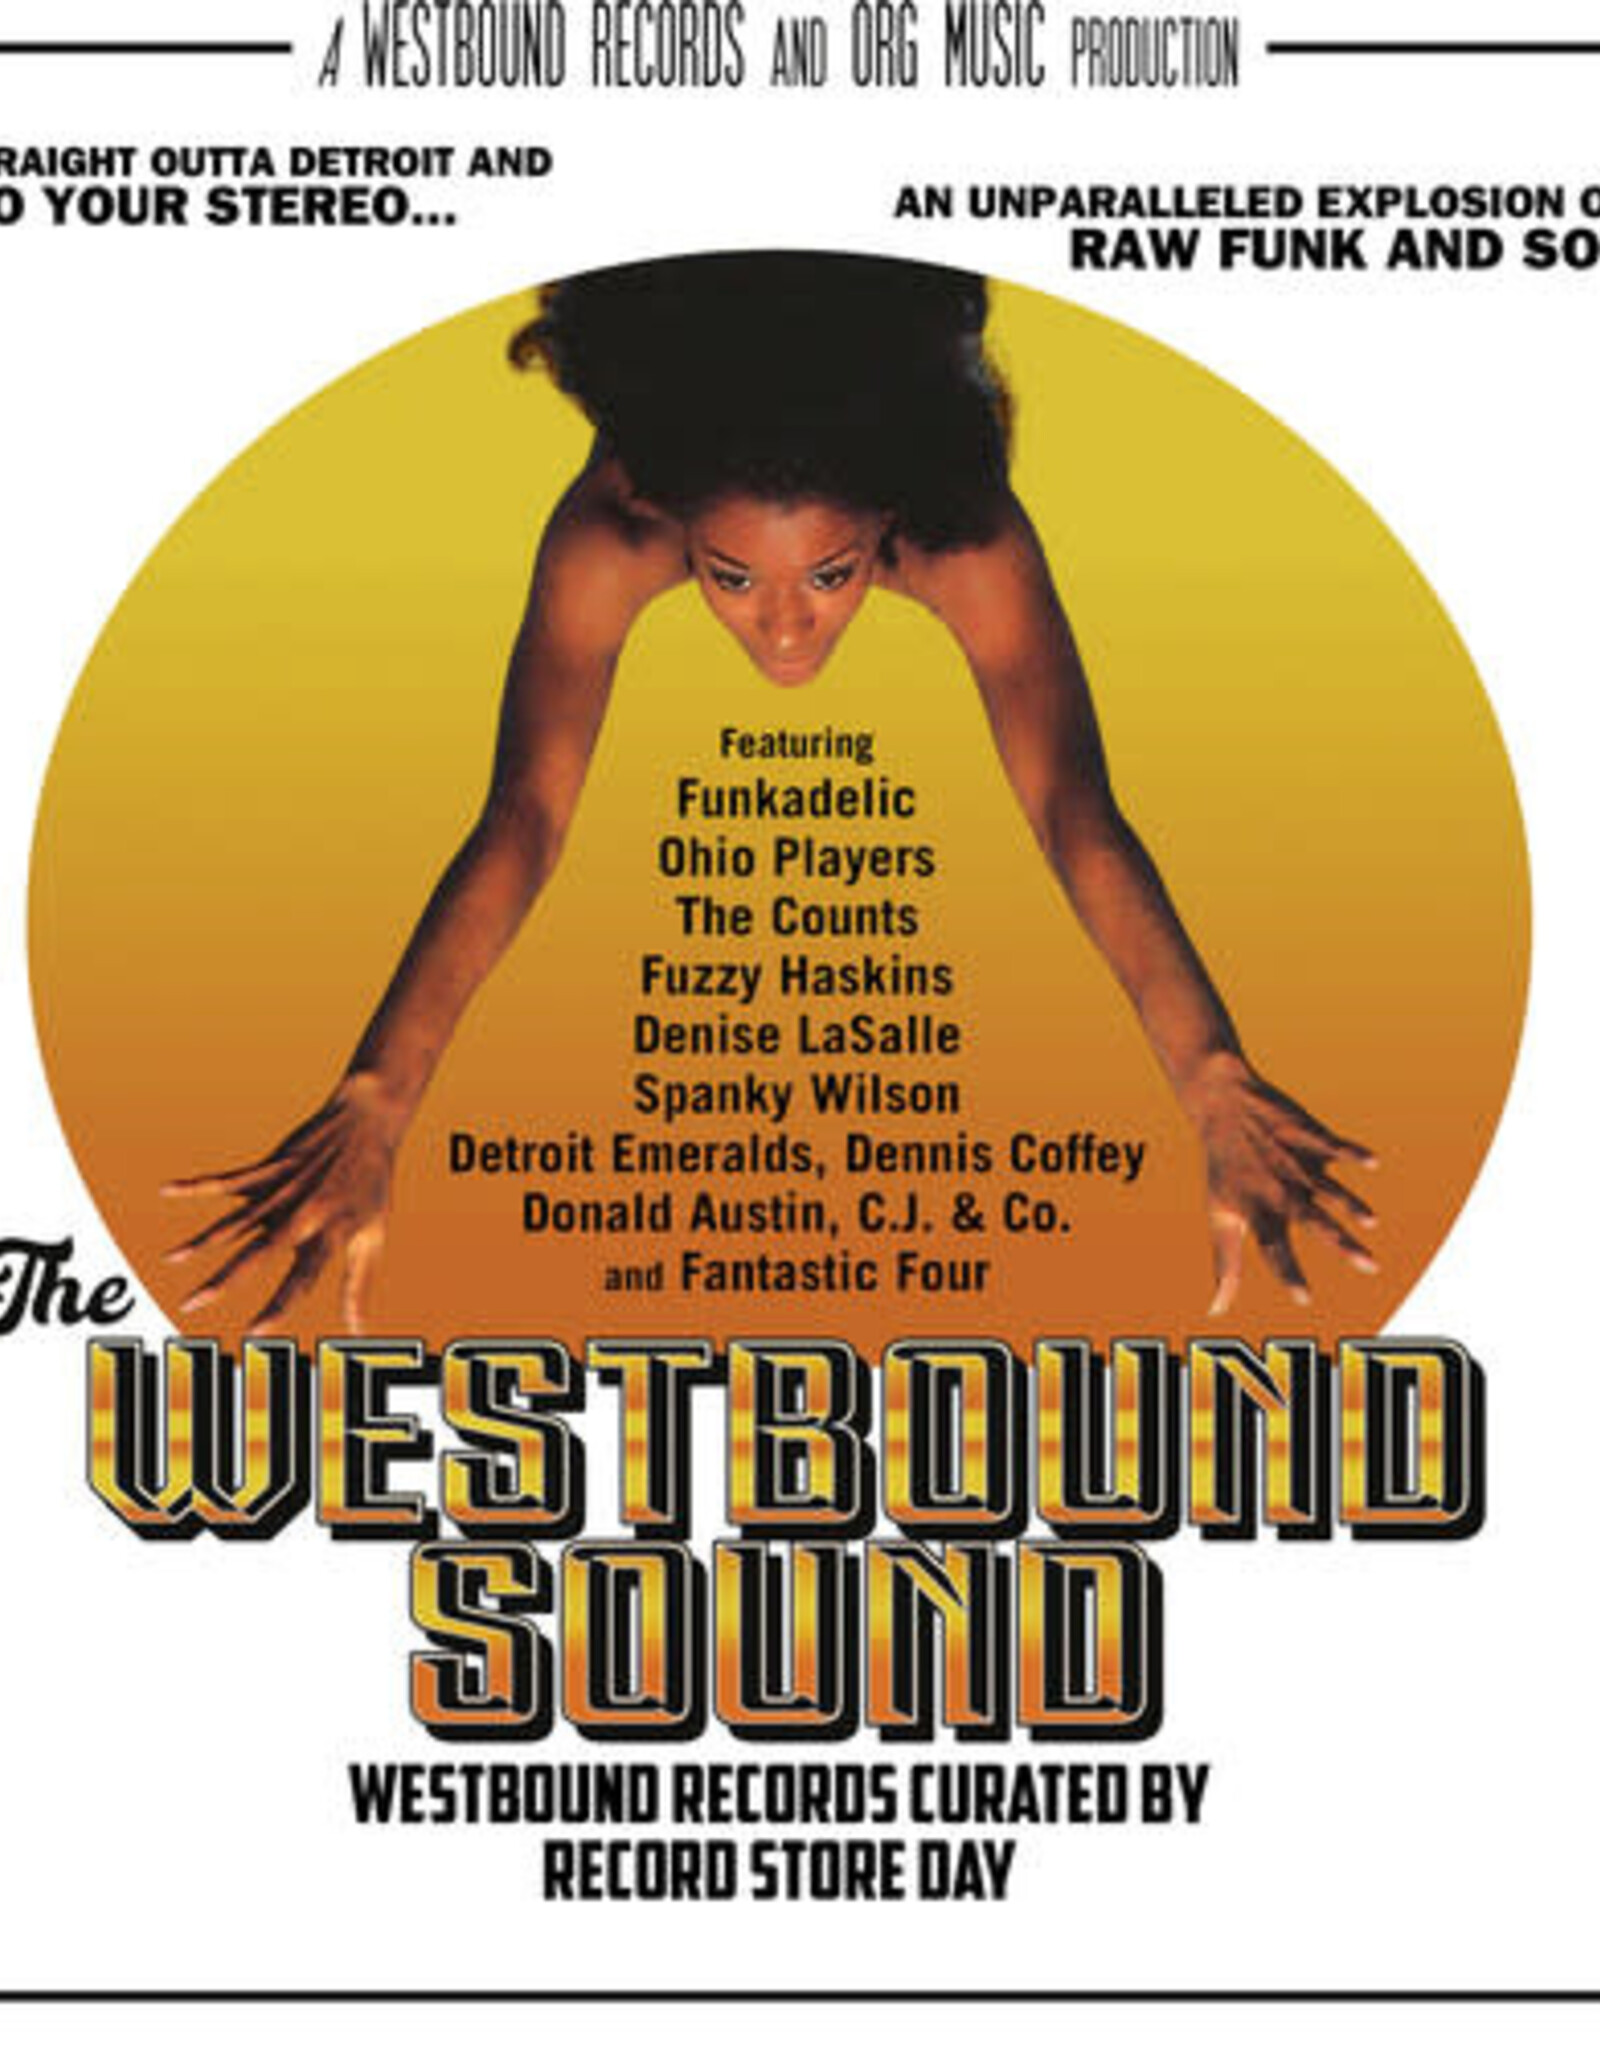 Westbound Records Curated by RSD, Volume 1	(RSD 2024)